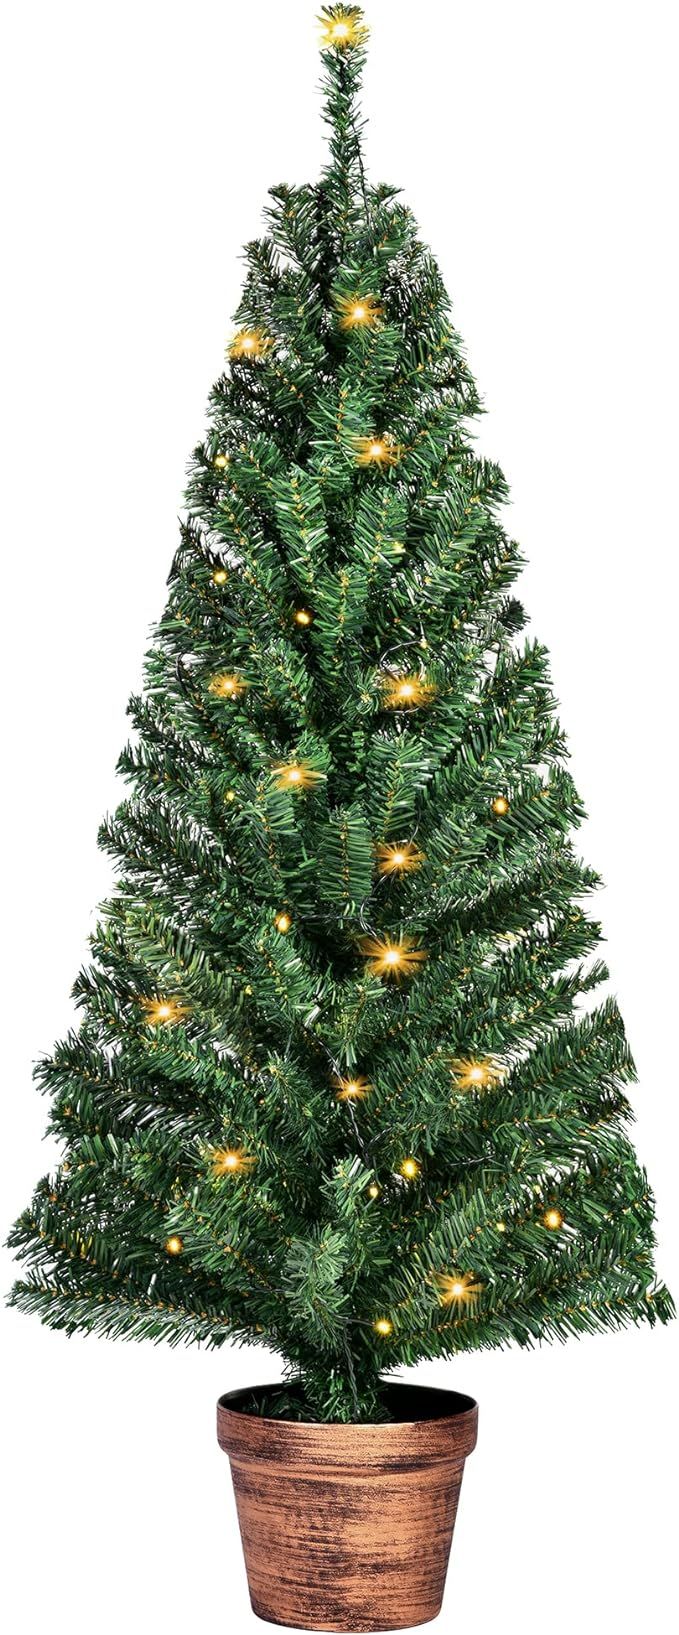 YEMODO Pre-lit Christmas Tree 4 Feet Artificial Xmas Potted Pine Tree for Home, Office, Party Dec... | Amazon (US)